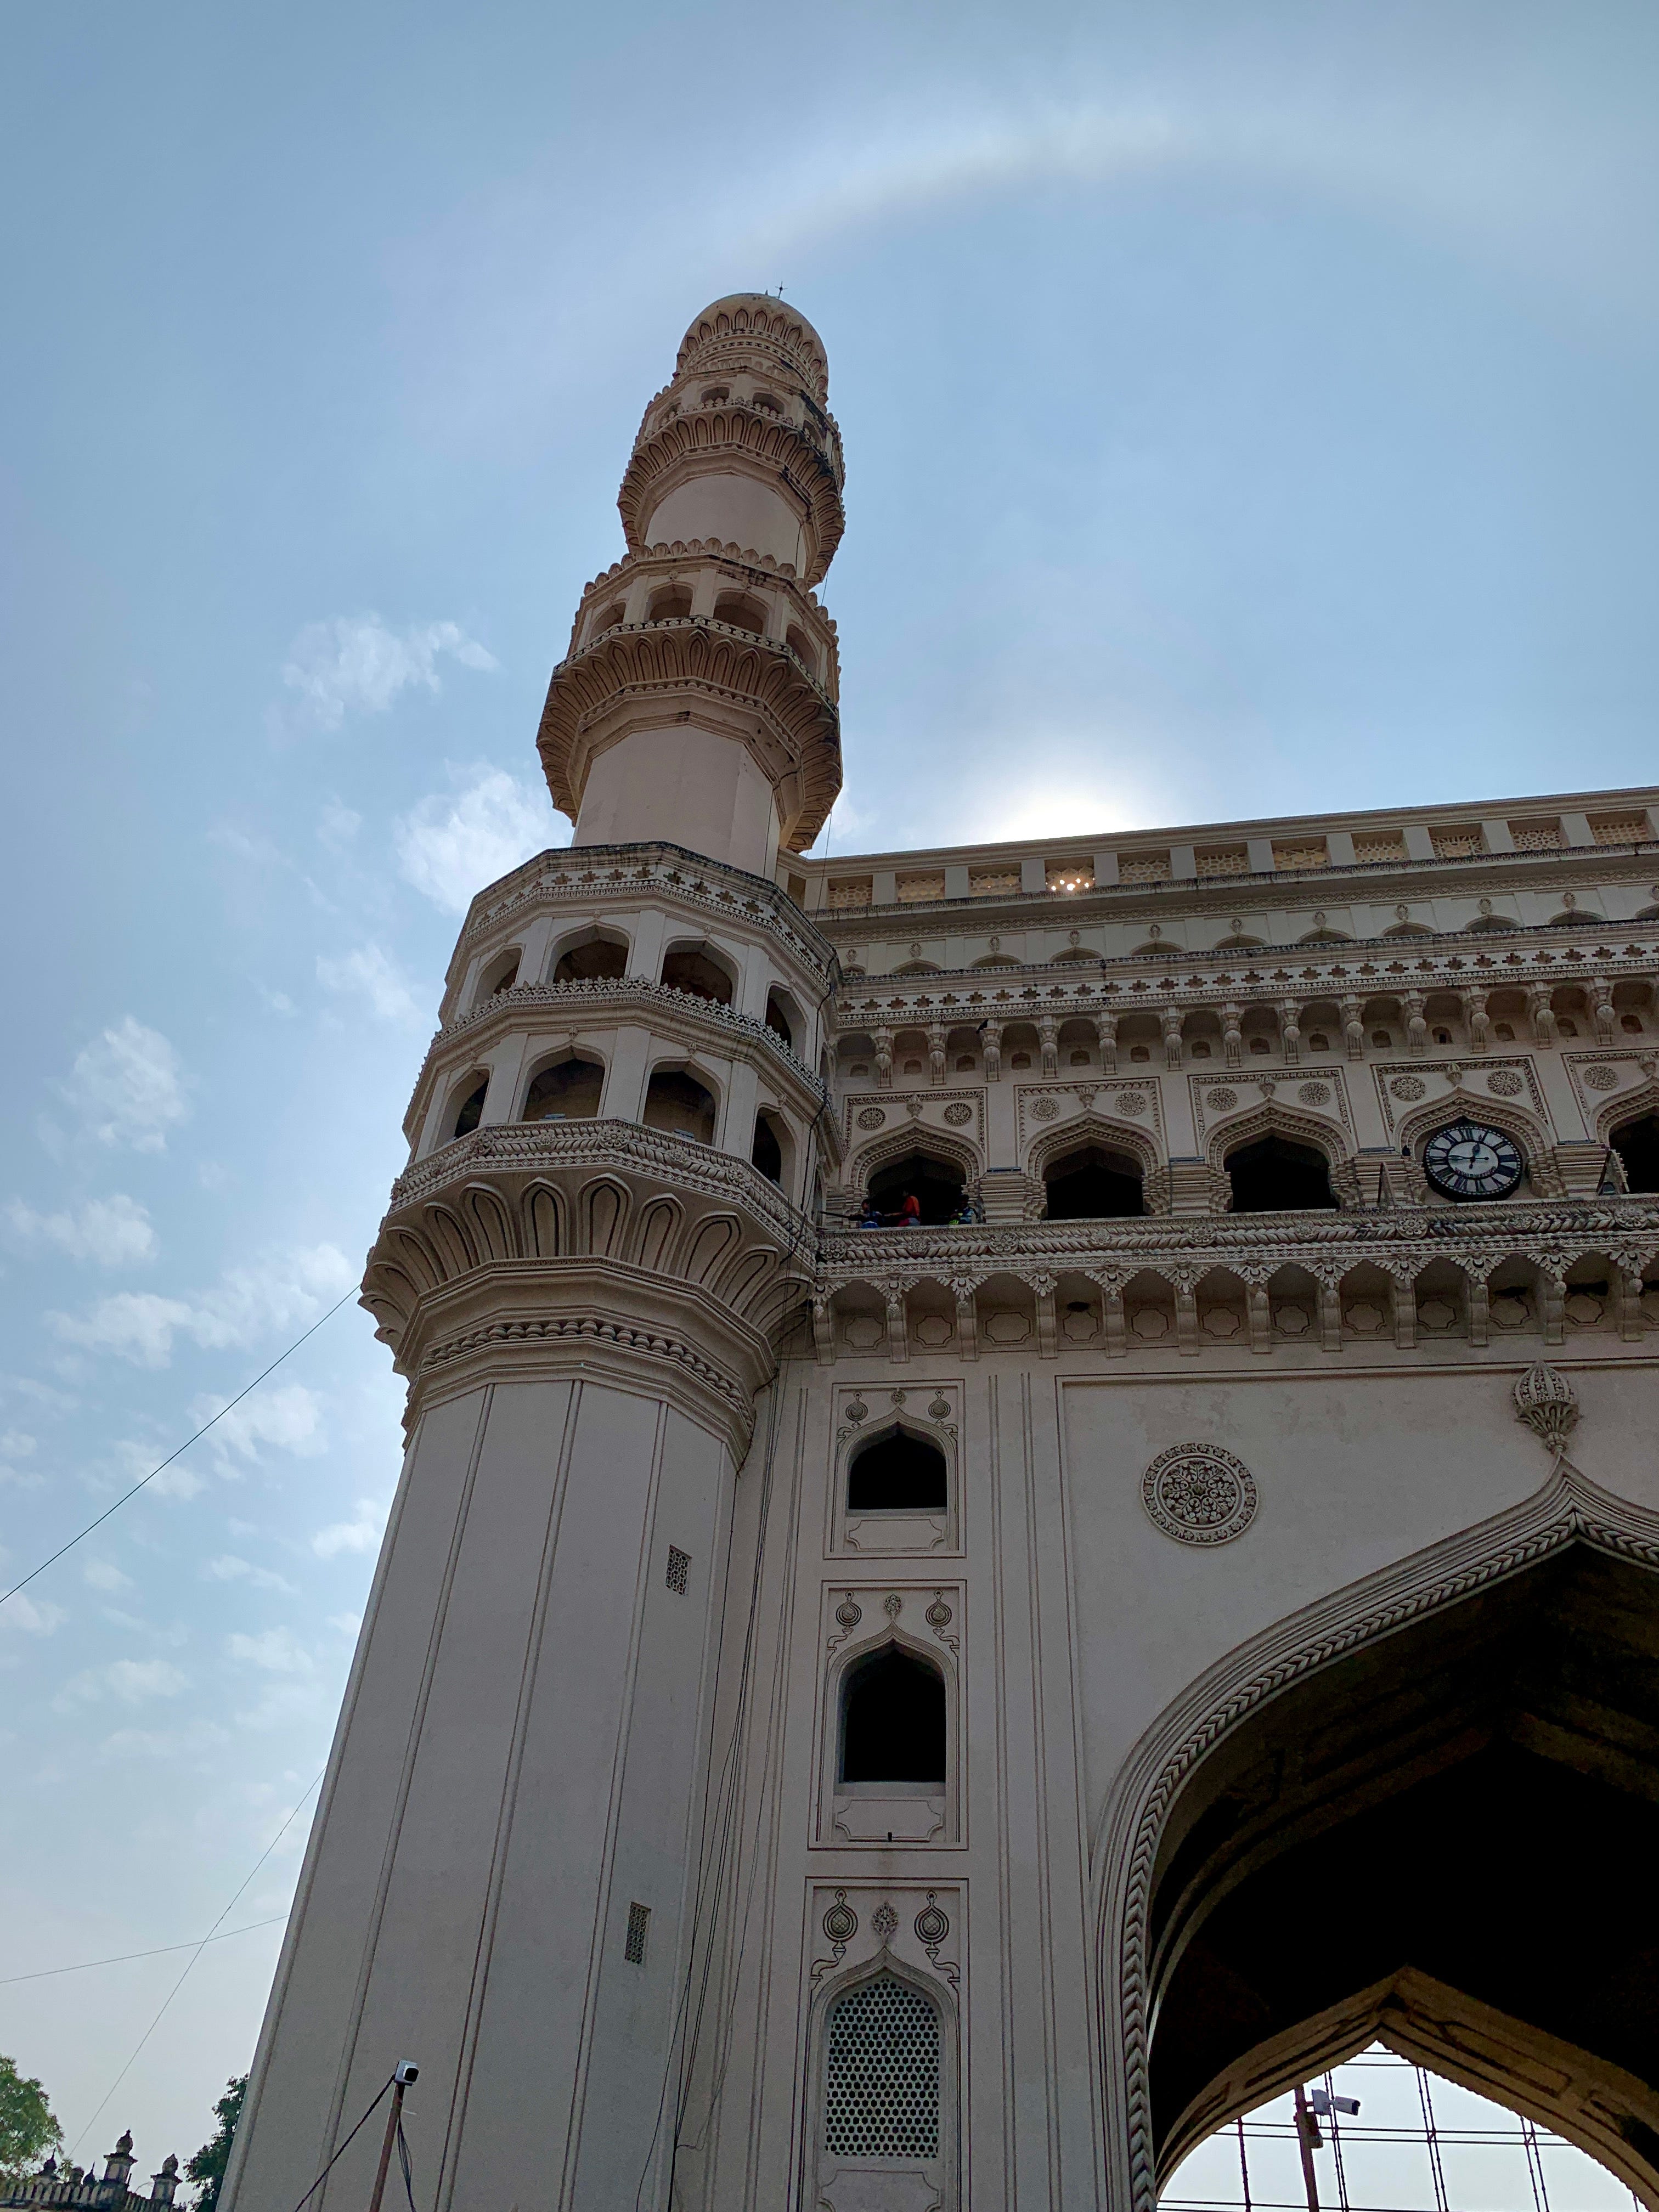 A day view of Charminar, looking up at one of its towering minarets.